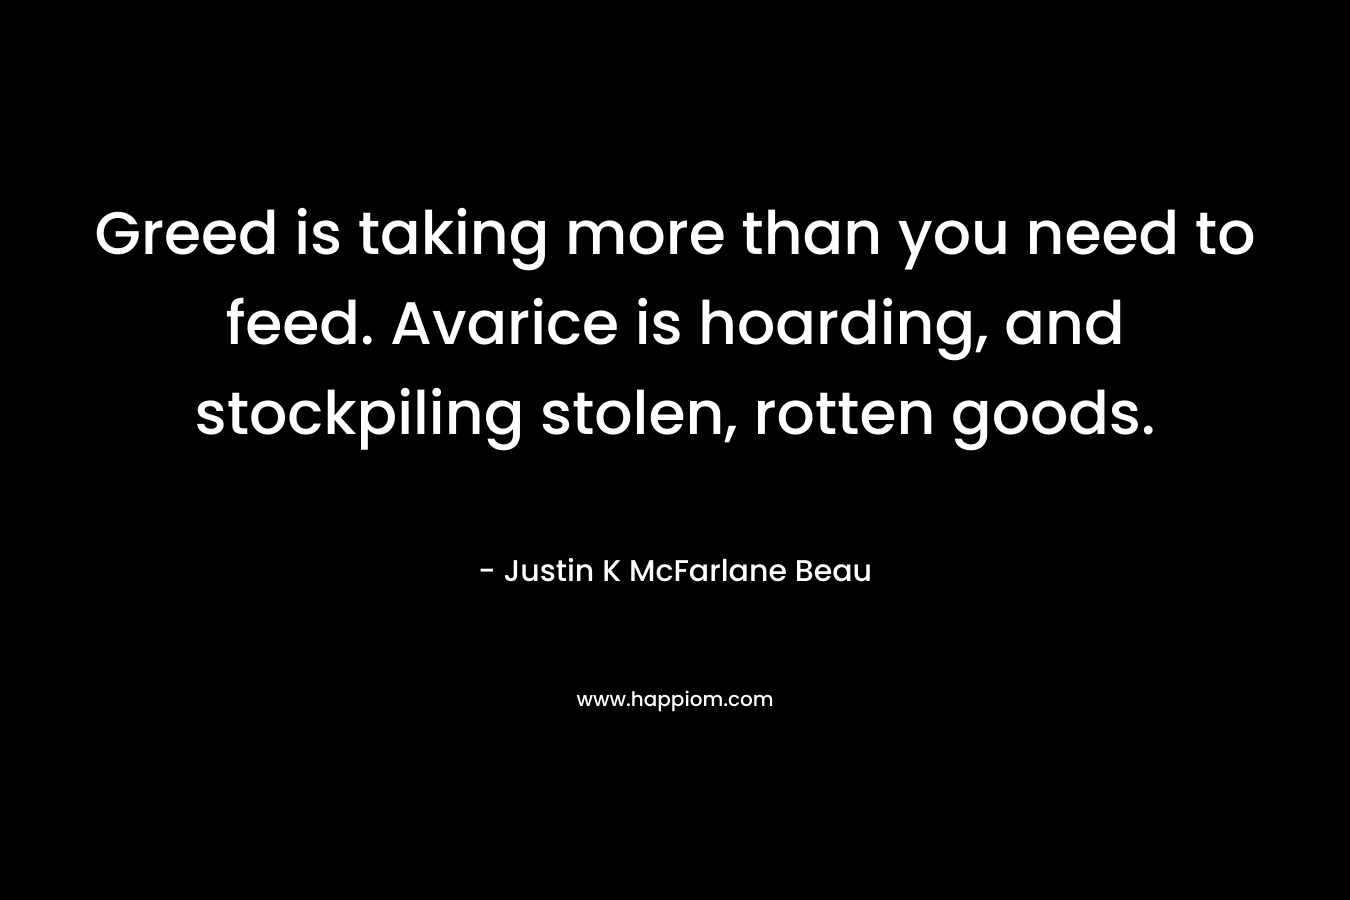 Greed is taking more than you need to feed. Avarice is hoarding, and stockpiling stolen, rotten goods. – Justin K McFarlane Beau